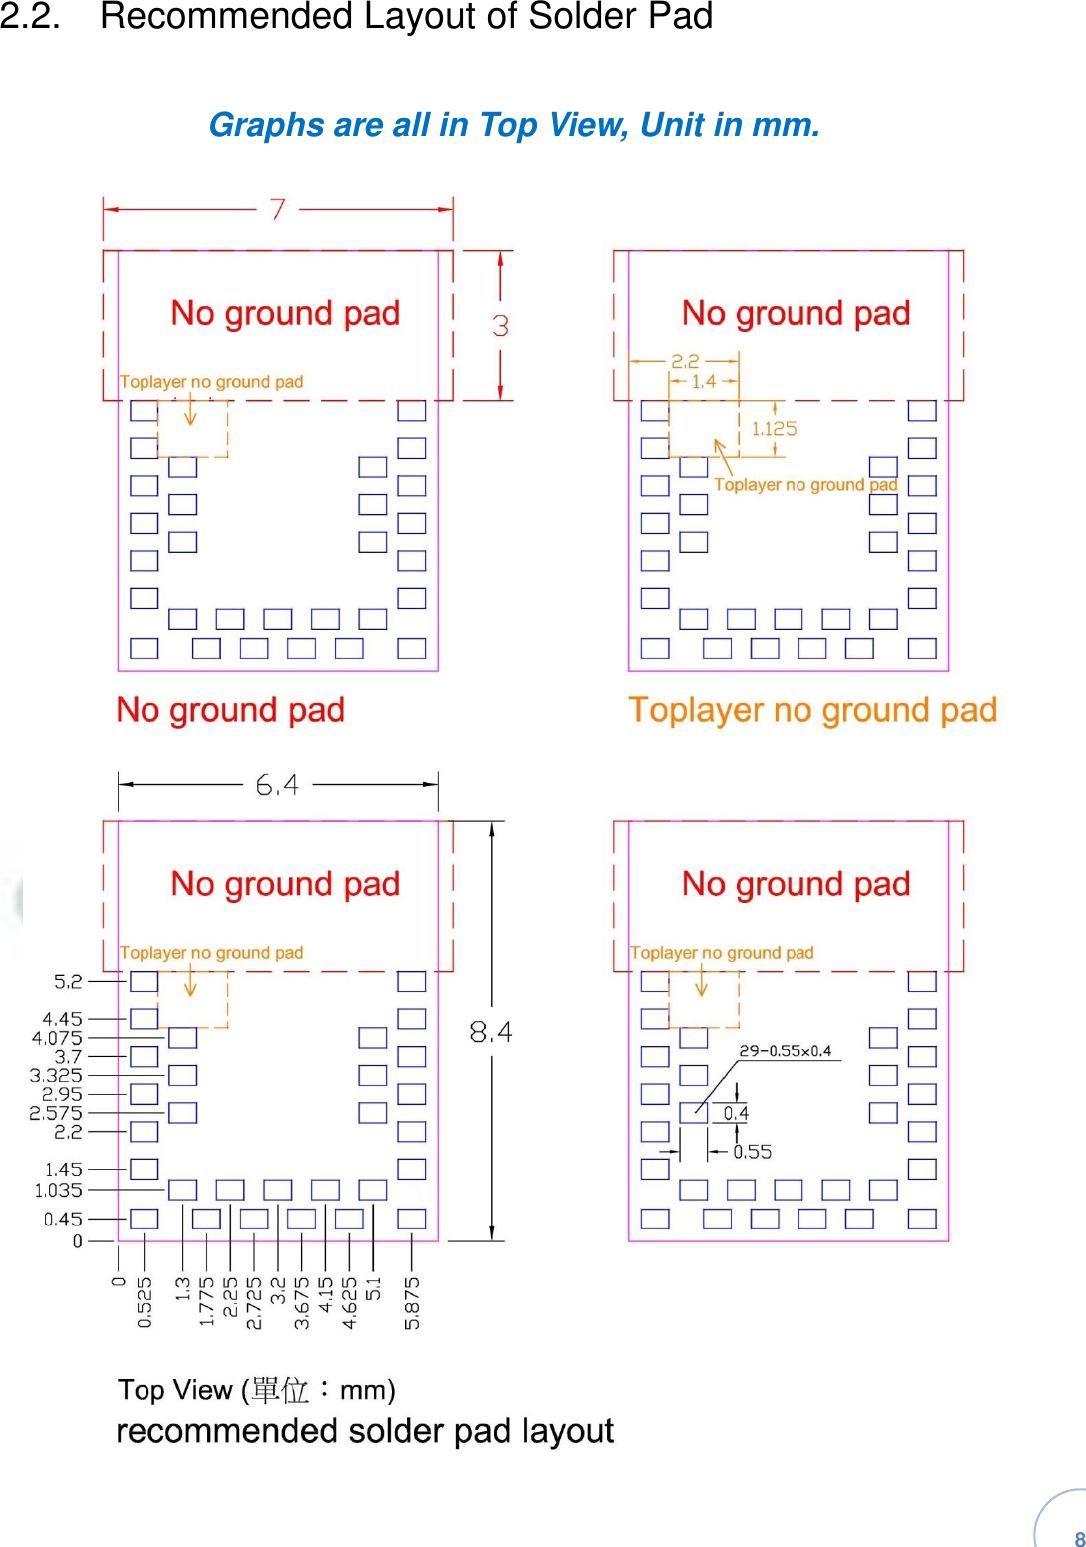   8 2.2.  Recommended Layout of Solder PadGraphs are all in Top View, Unit in mm.